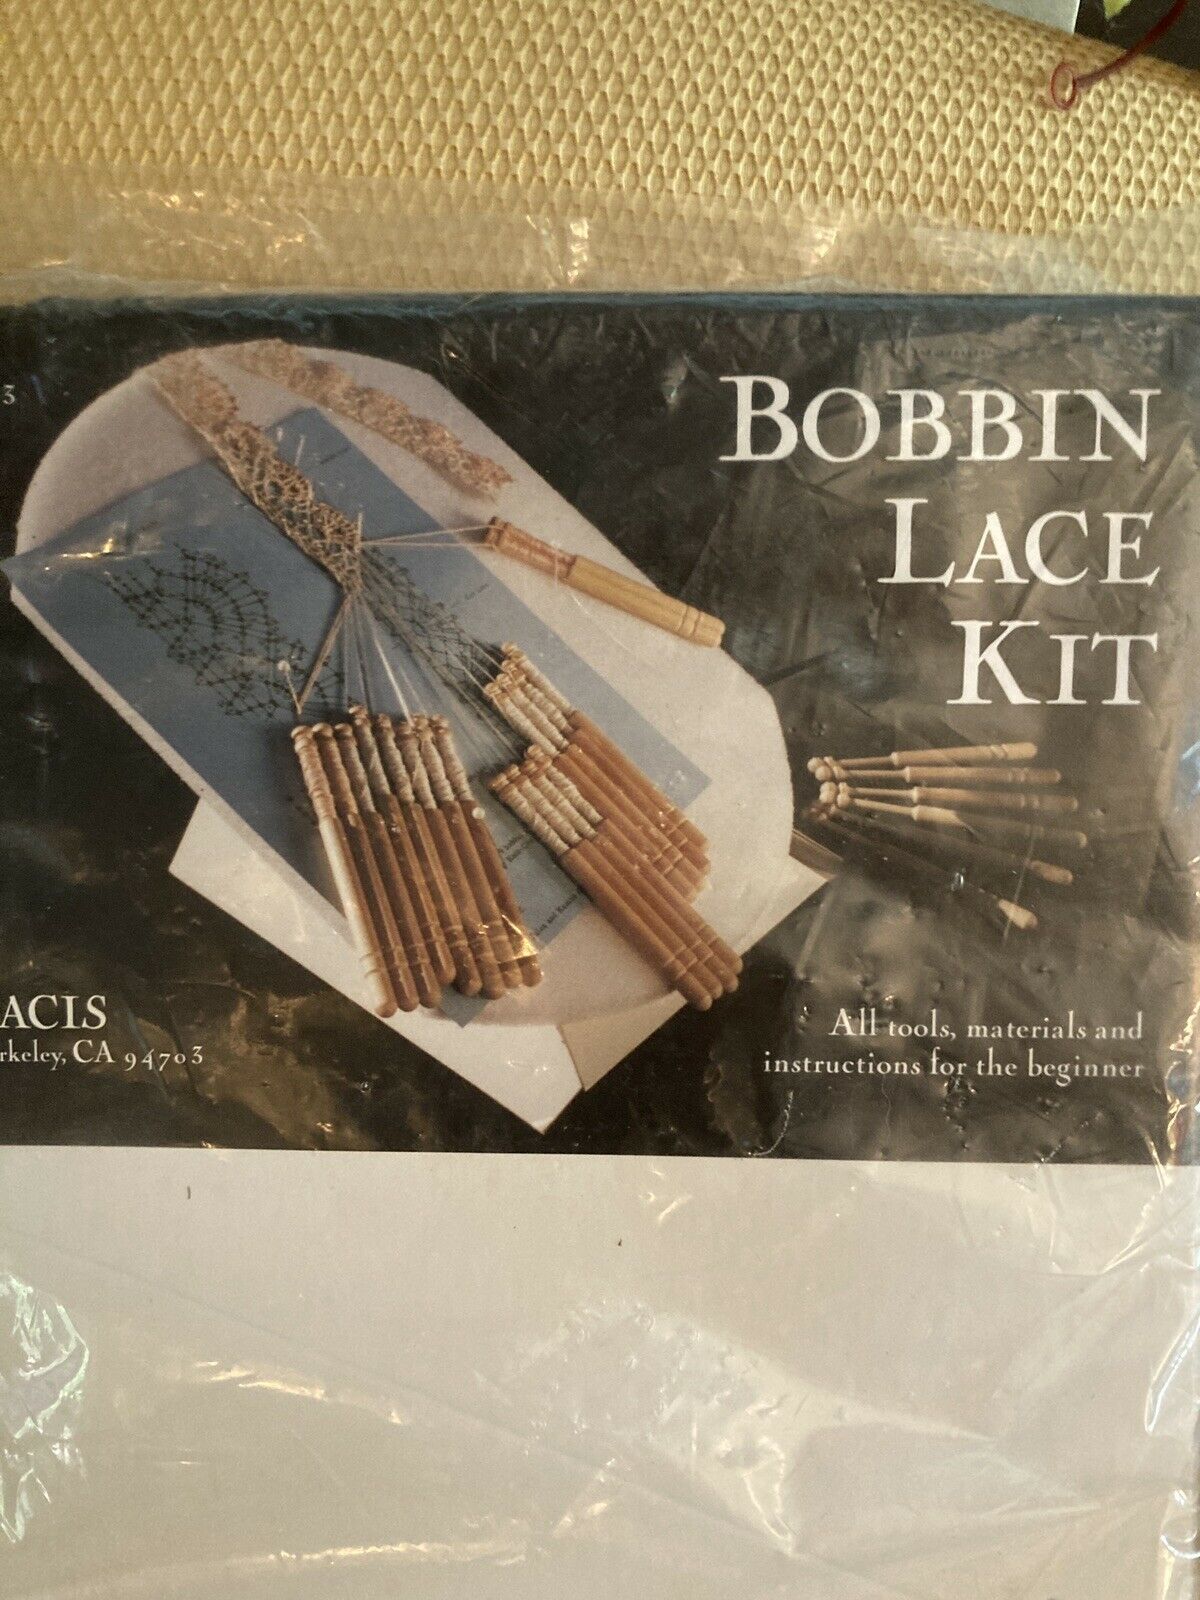 Bobbin Lace Kit Lb43 All Tools, Materials & Instructions For The Beginner New